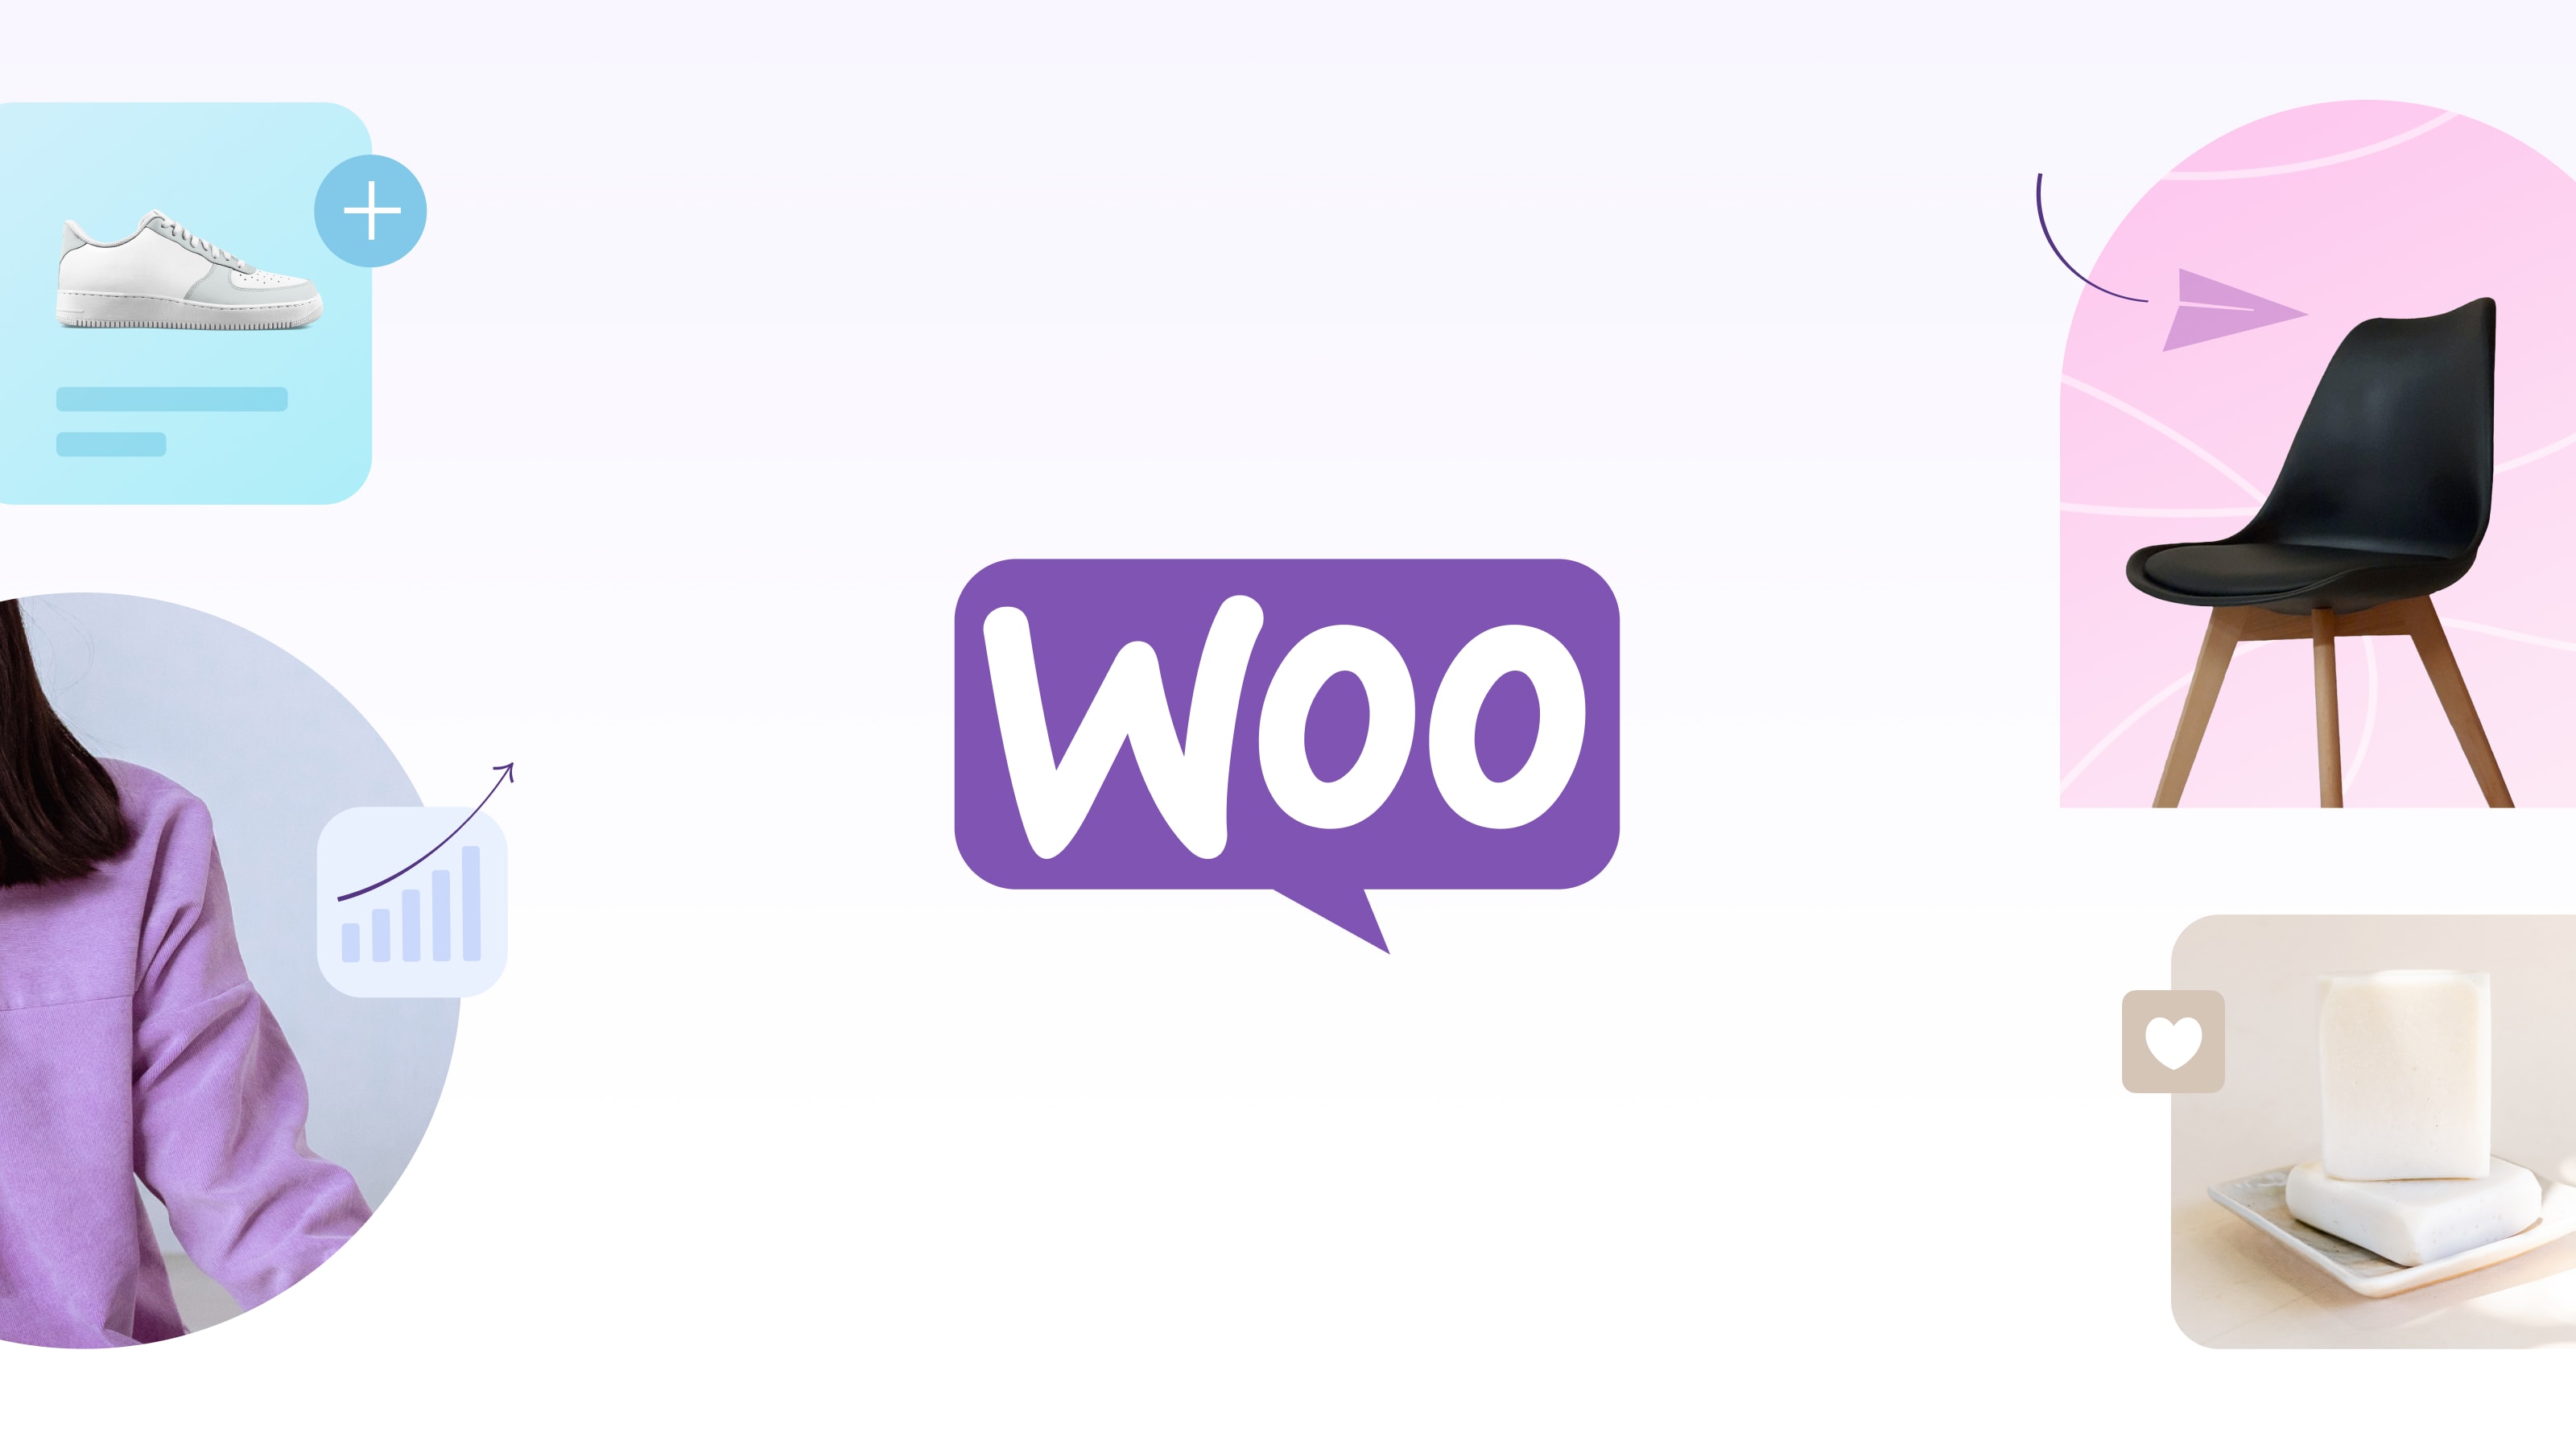 www.woothemes.com